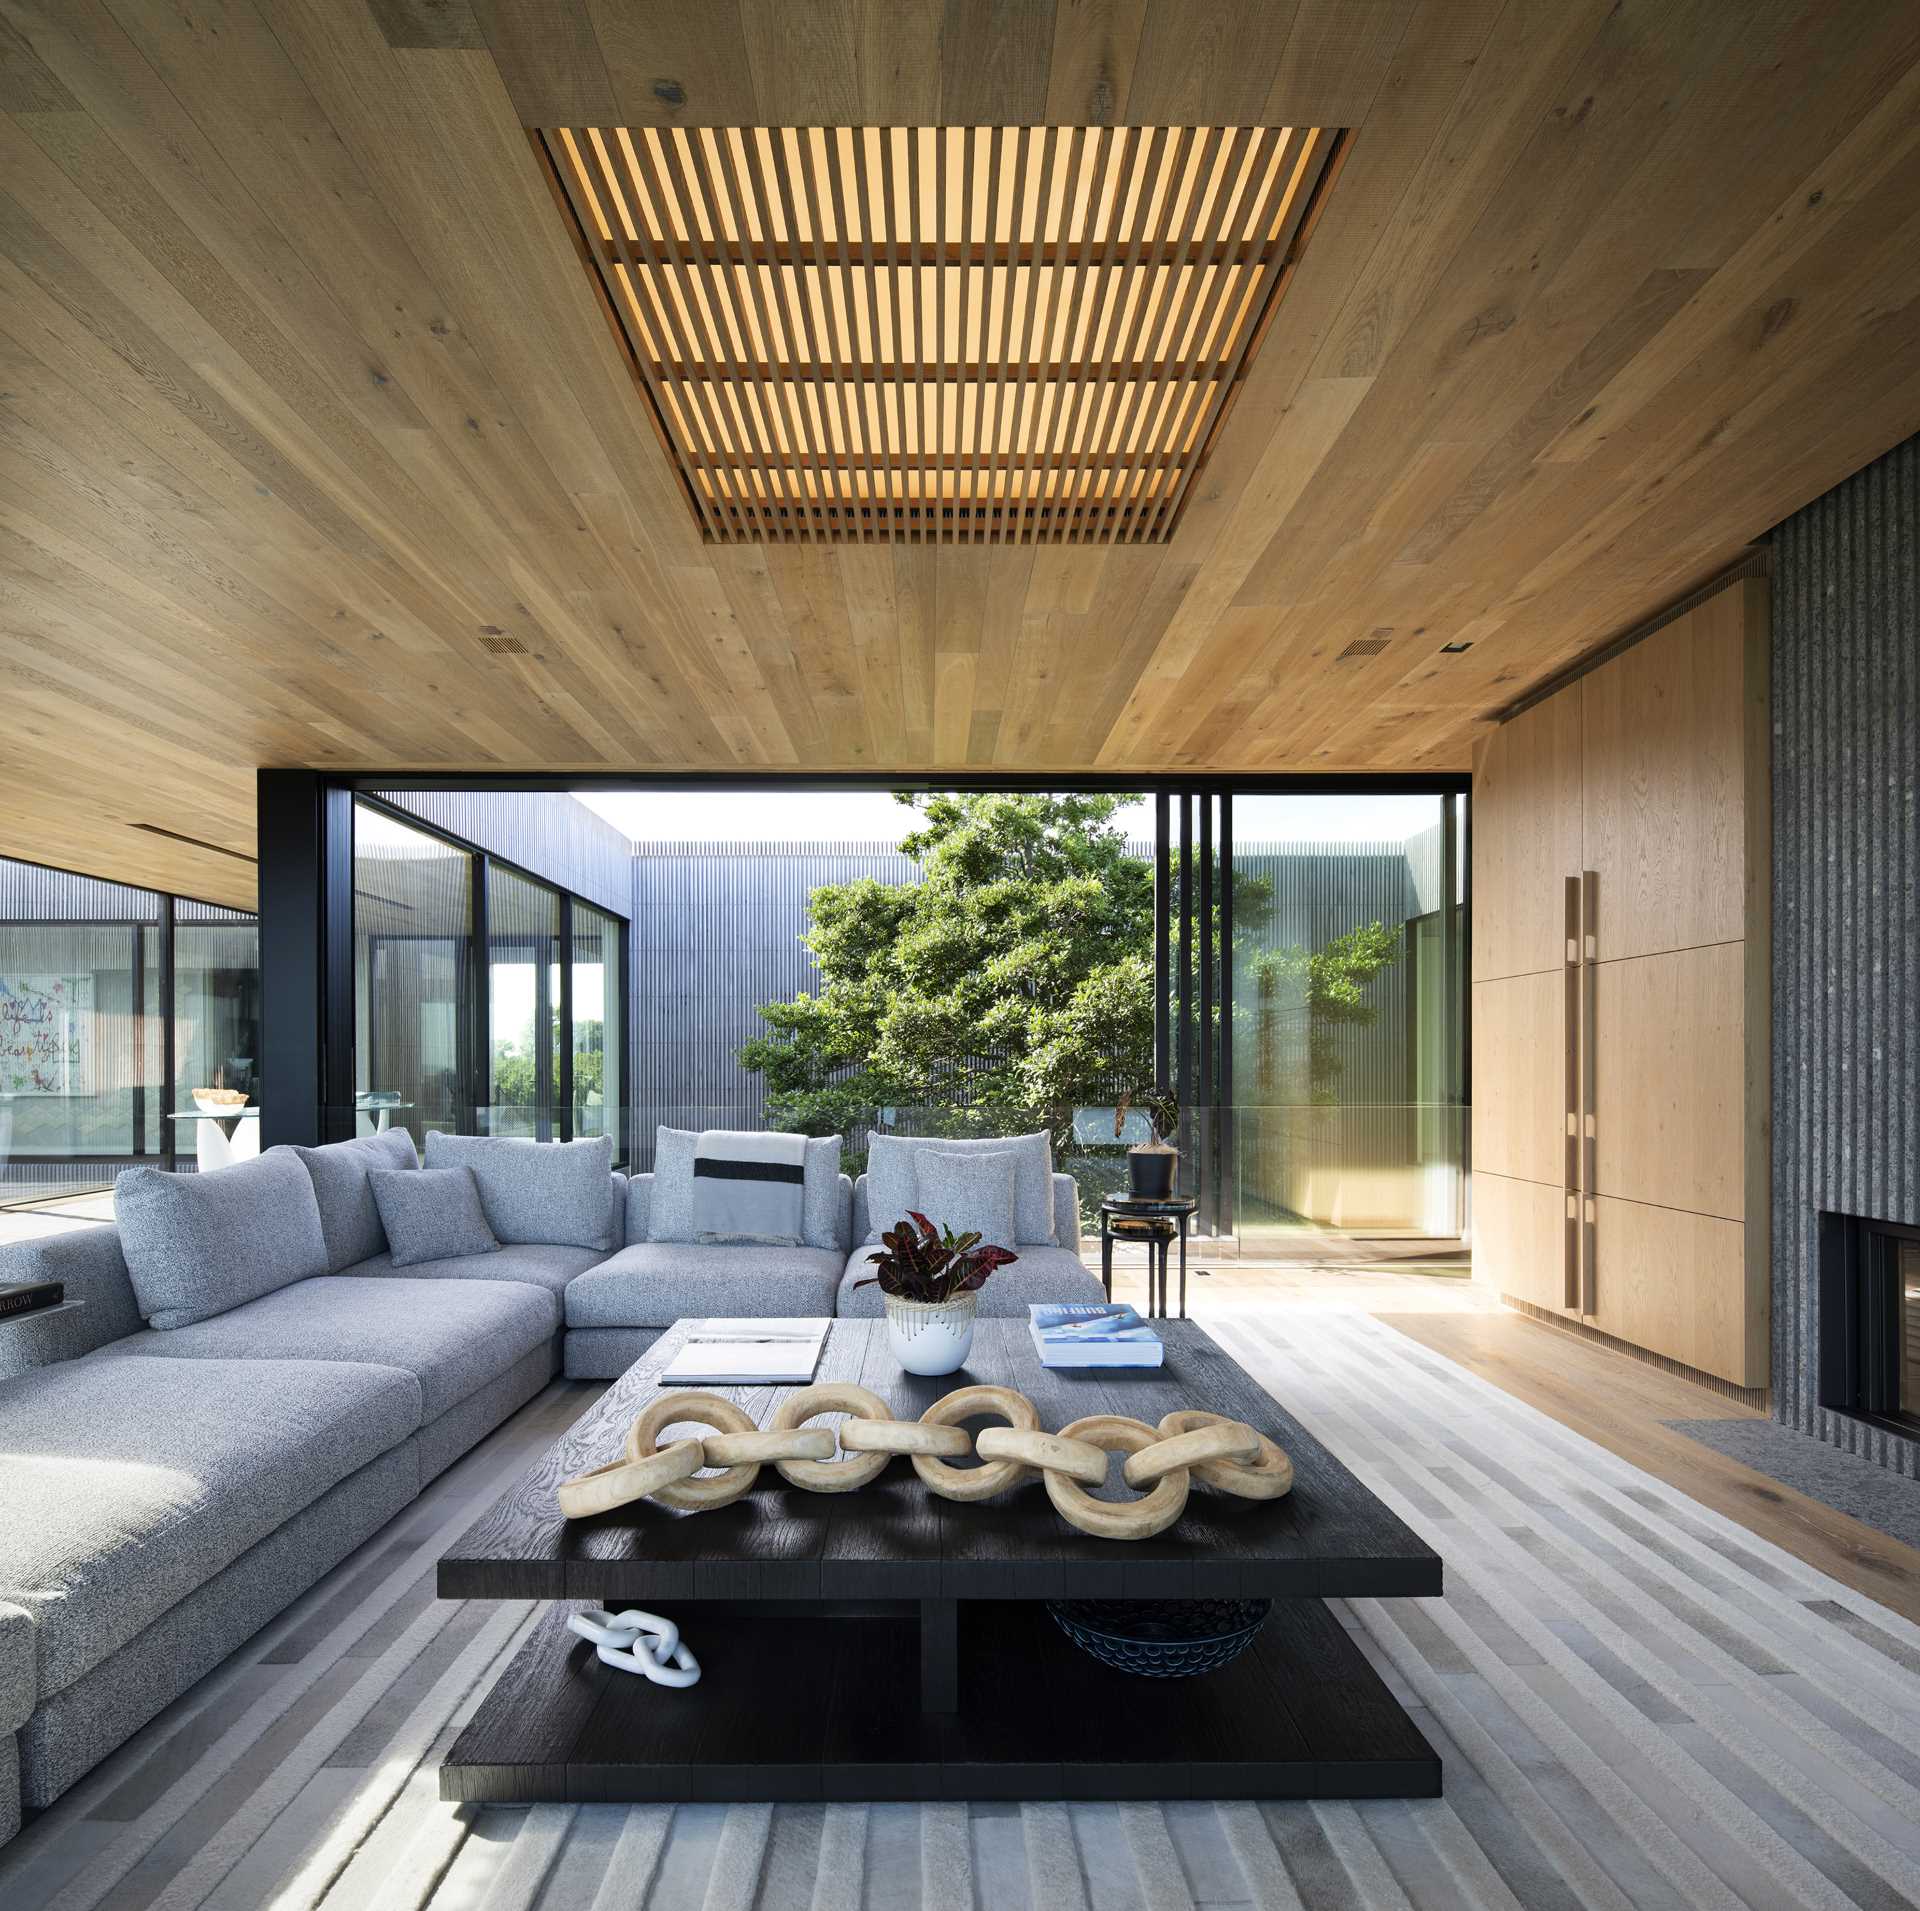 The living room of this modern house includes a wood ceiling with large operational sliding glass walls, while glass railings provide an uninterrupted view.